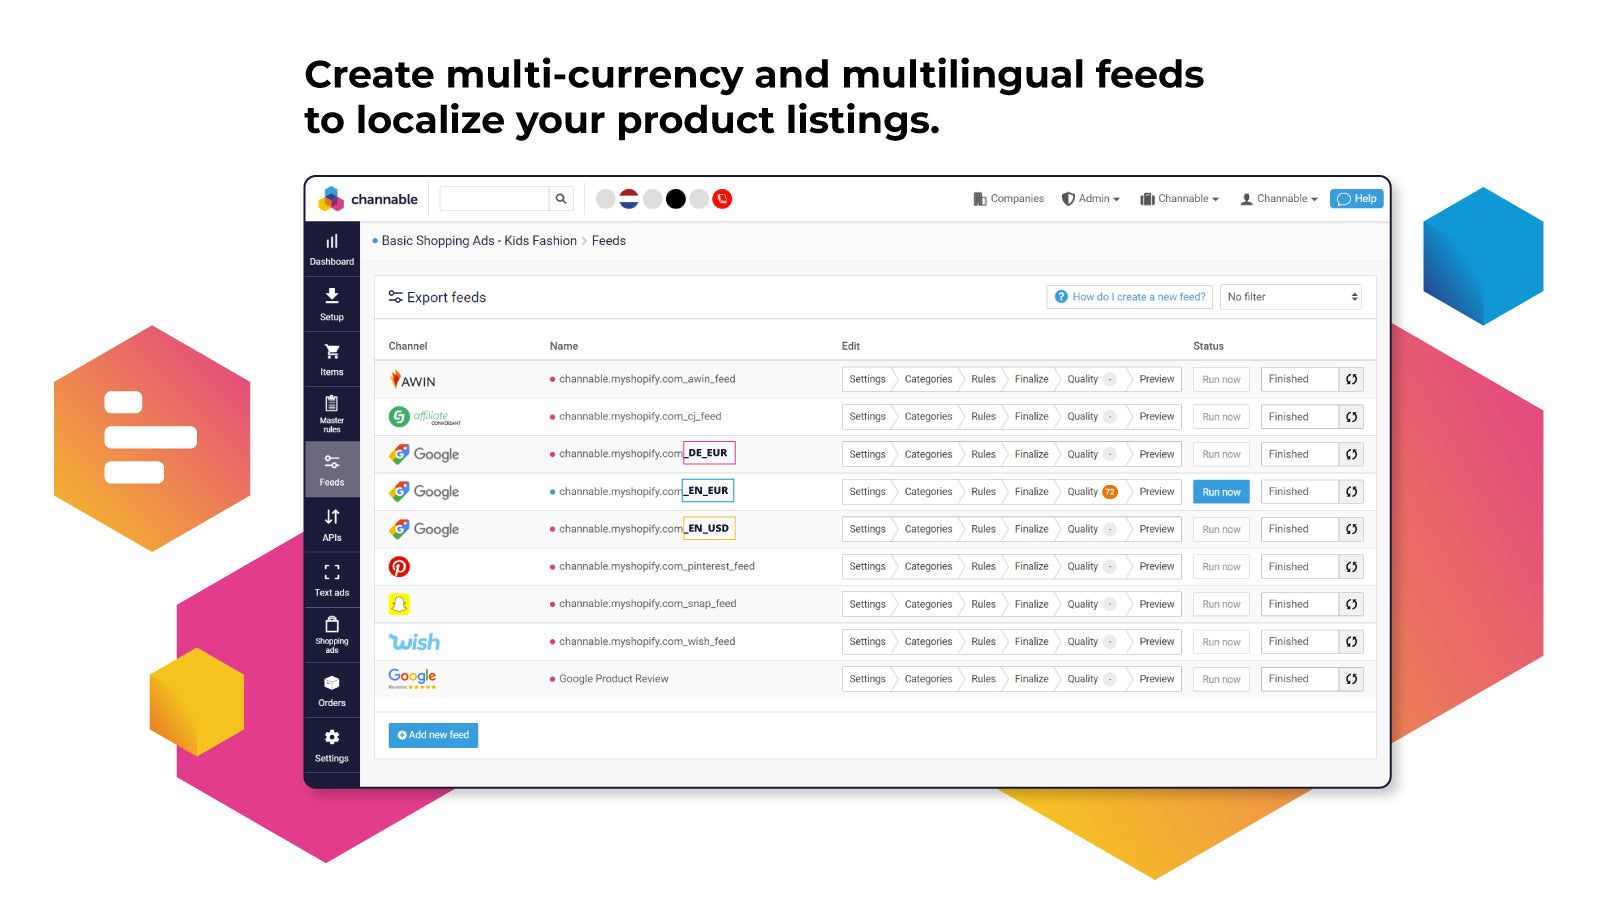 Create multilingual and multi currency feeds for every channel